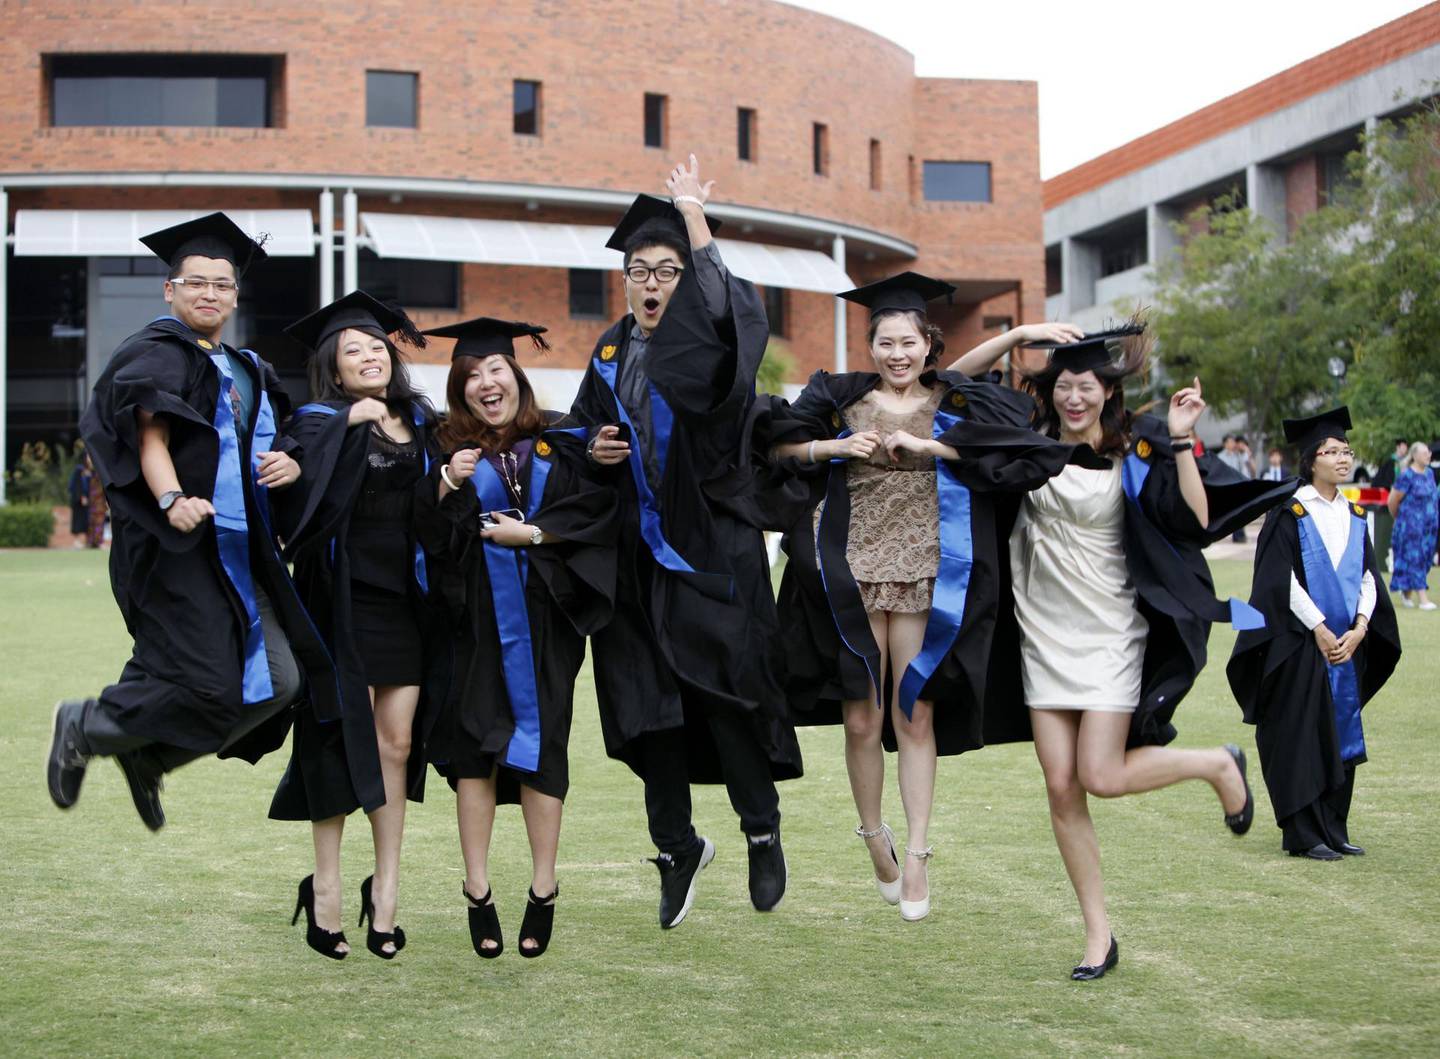 --FILE--Chinese students studying abroad dressed in academic gowns pose during a graduation photo shoot at Curtin University in Bentley, Perth, Western Australia, Australia, 11 February 2012.

In 2015, a total of 1.26 million Chinese students studied abroad, accounting for about 25 percent of all international students worldwide. According to an annual report by the Center for China and Globalization (CCG), China has become the single largest source of overseas students. The report, released on Dec. 12 and titled "Annual Report on the Development of Chinese Students Studying Abroad (2016)," was jointly published by CCG and the Social Science Academic Press (China). It is the fifth version of the research report, which was first published in 2012. According to CCG's research, China is the largest source of overseas students in English-speaking countries including the U.S., Canada, Britain and Australia. It is also the top source for Asian countries including Japan, South Korea and Singapore. Statistics show that Chinese students account for more than 30 percent of total overseas students in the U.S. and Canada, and about 62 percent of international students in South Korea in 2015. The report pointed out that China has been the largest source of overseas students in the U.S. for seven consecutive years, and the number of Chinese students earning bachelor's degrees surpassed the number of those doing graduate studies for the first time last year. Meanwhile, the number of younger students studying abroad is rising every year. A study conducted by CCG and MyCOS showed a significant increase in Chinese students studying in high schools outside of China. The proportion of Chinese students going abroad for high school jumped from 17 percent in 2012 to 27 percent in 2015. Data released last year by the U.S. Department of Homeland Security indicates that the number of Chinese students in middle and high schools in the U.S. has increased threefold in the last five years.No U